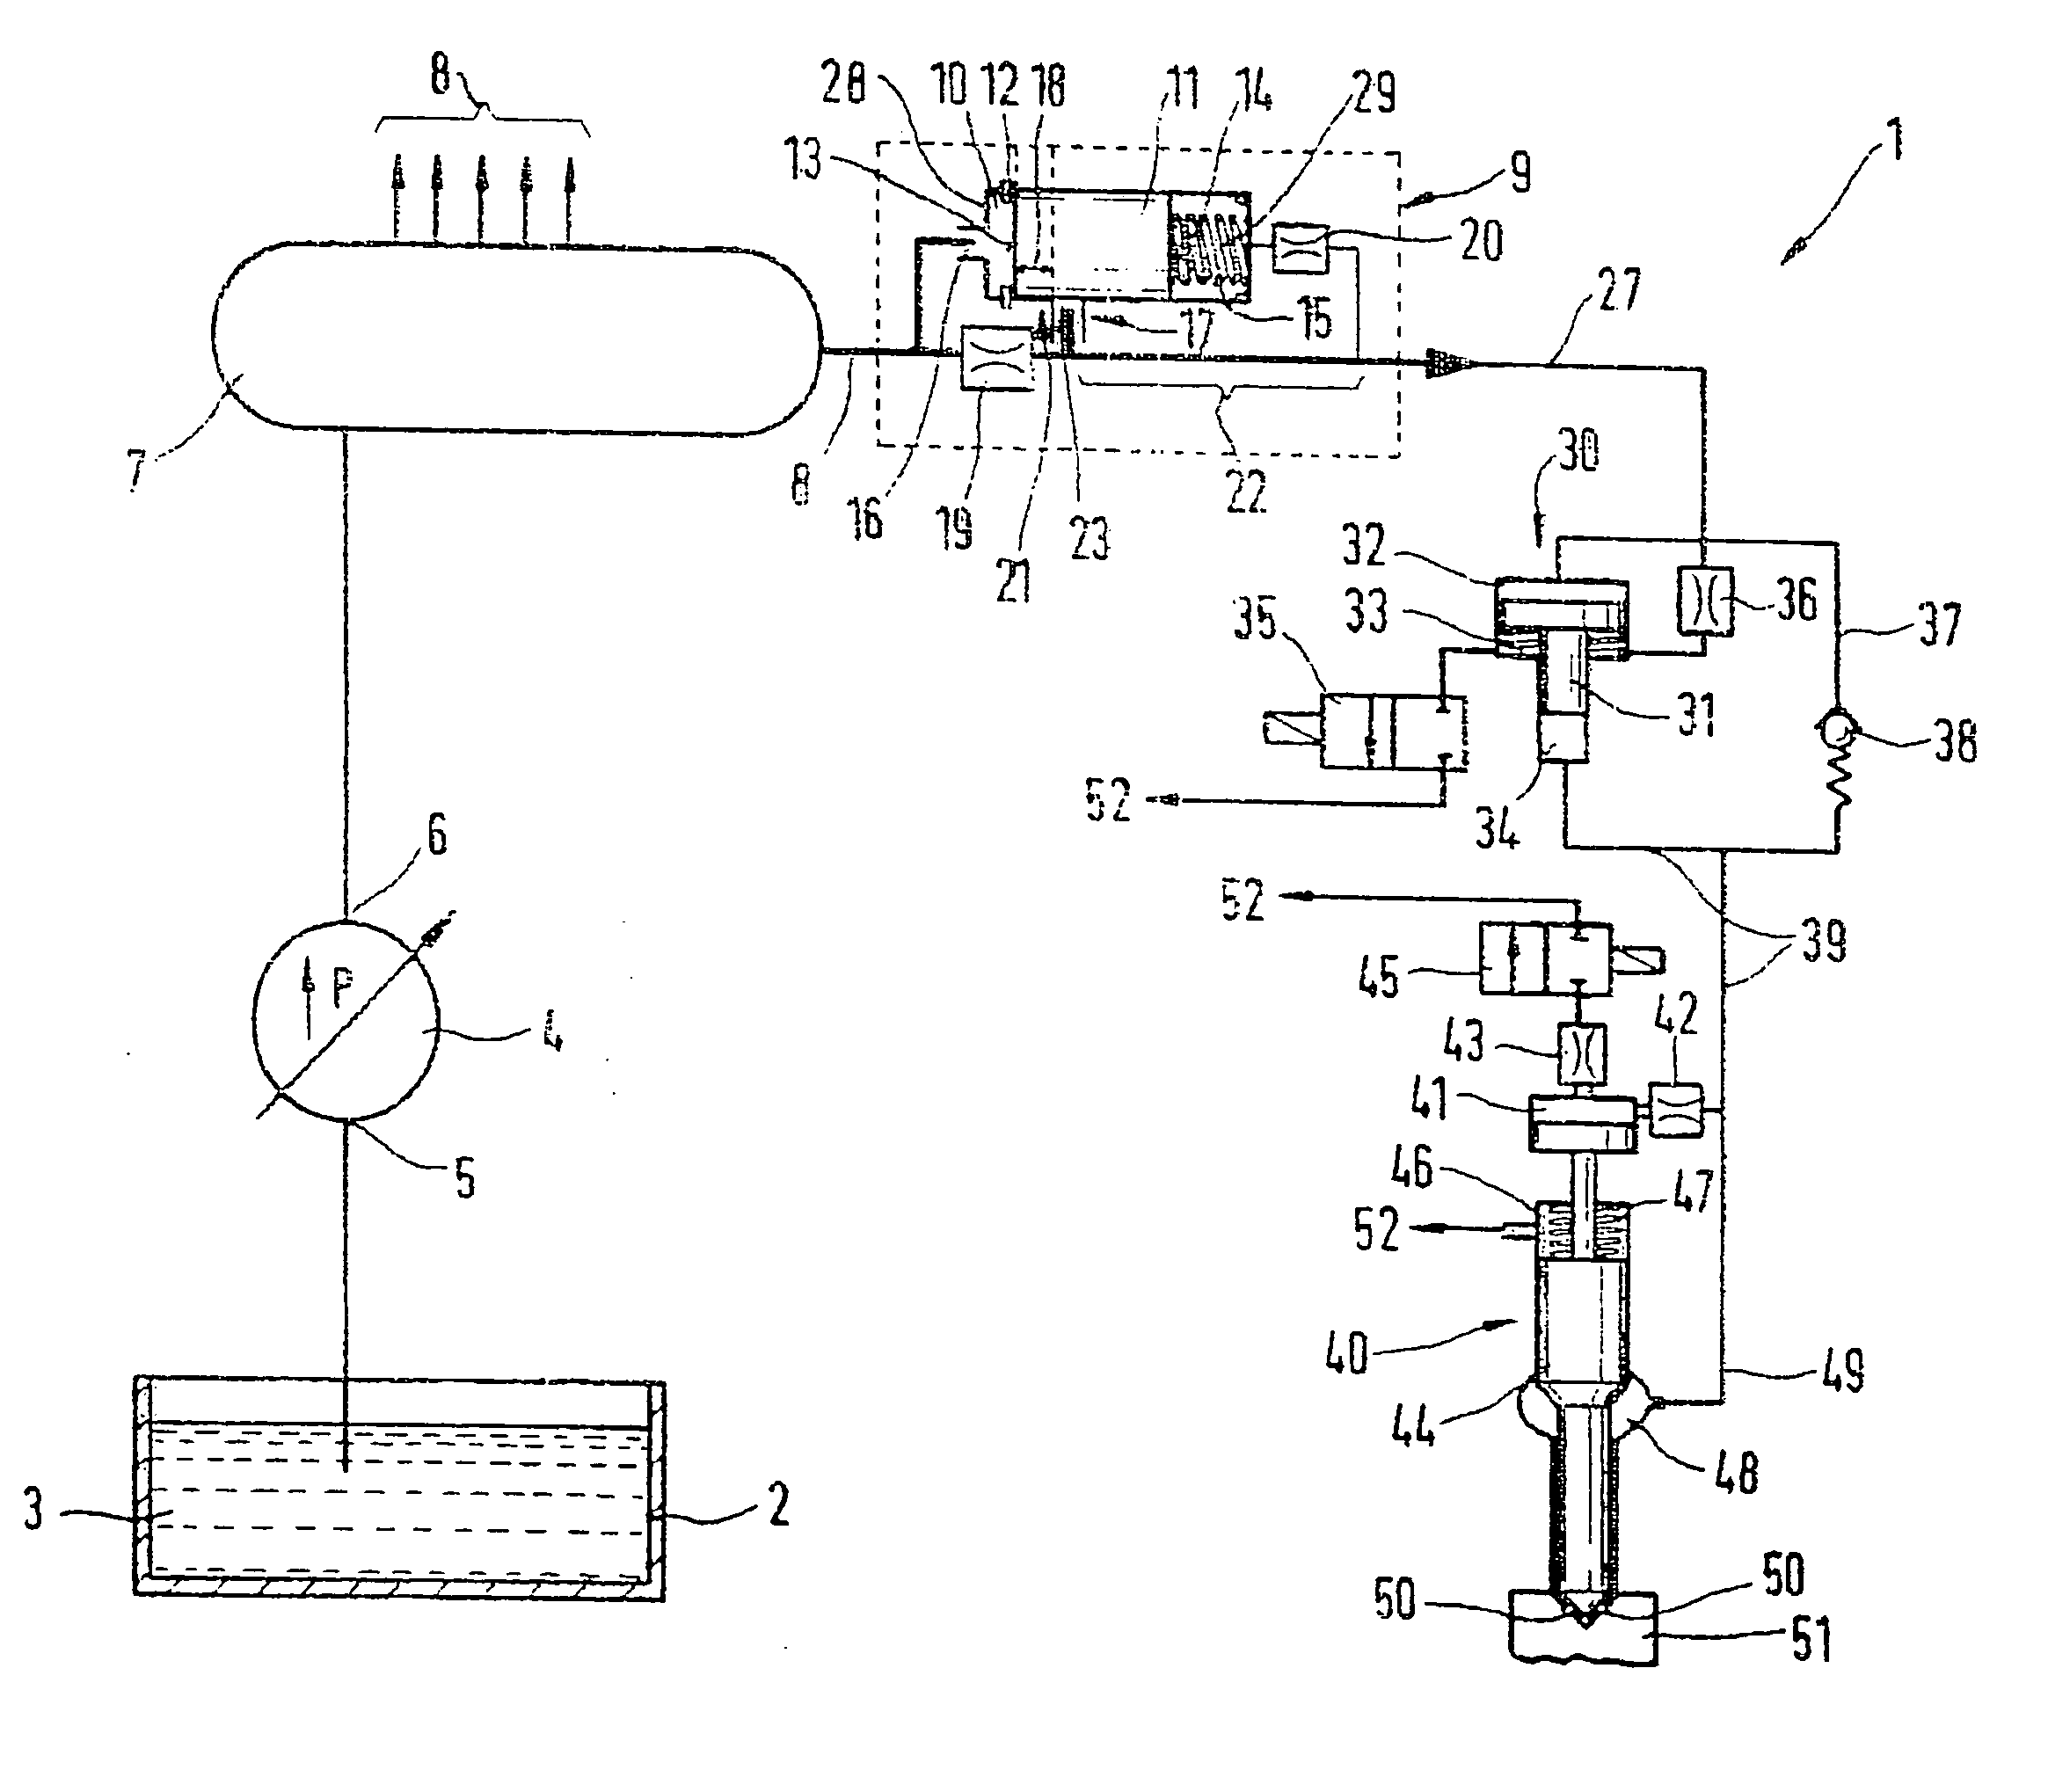 Fuel injection apparatus including device for suppressing pressure waves in reservoir injection systems